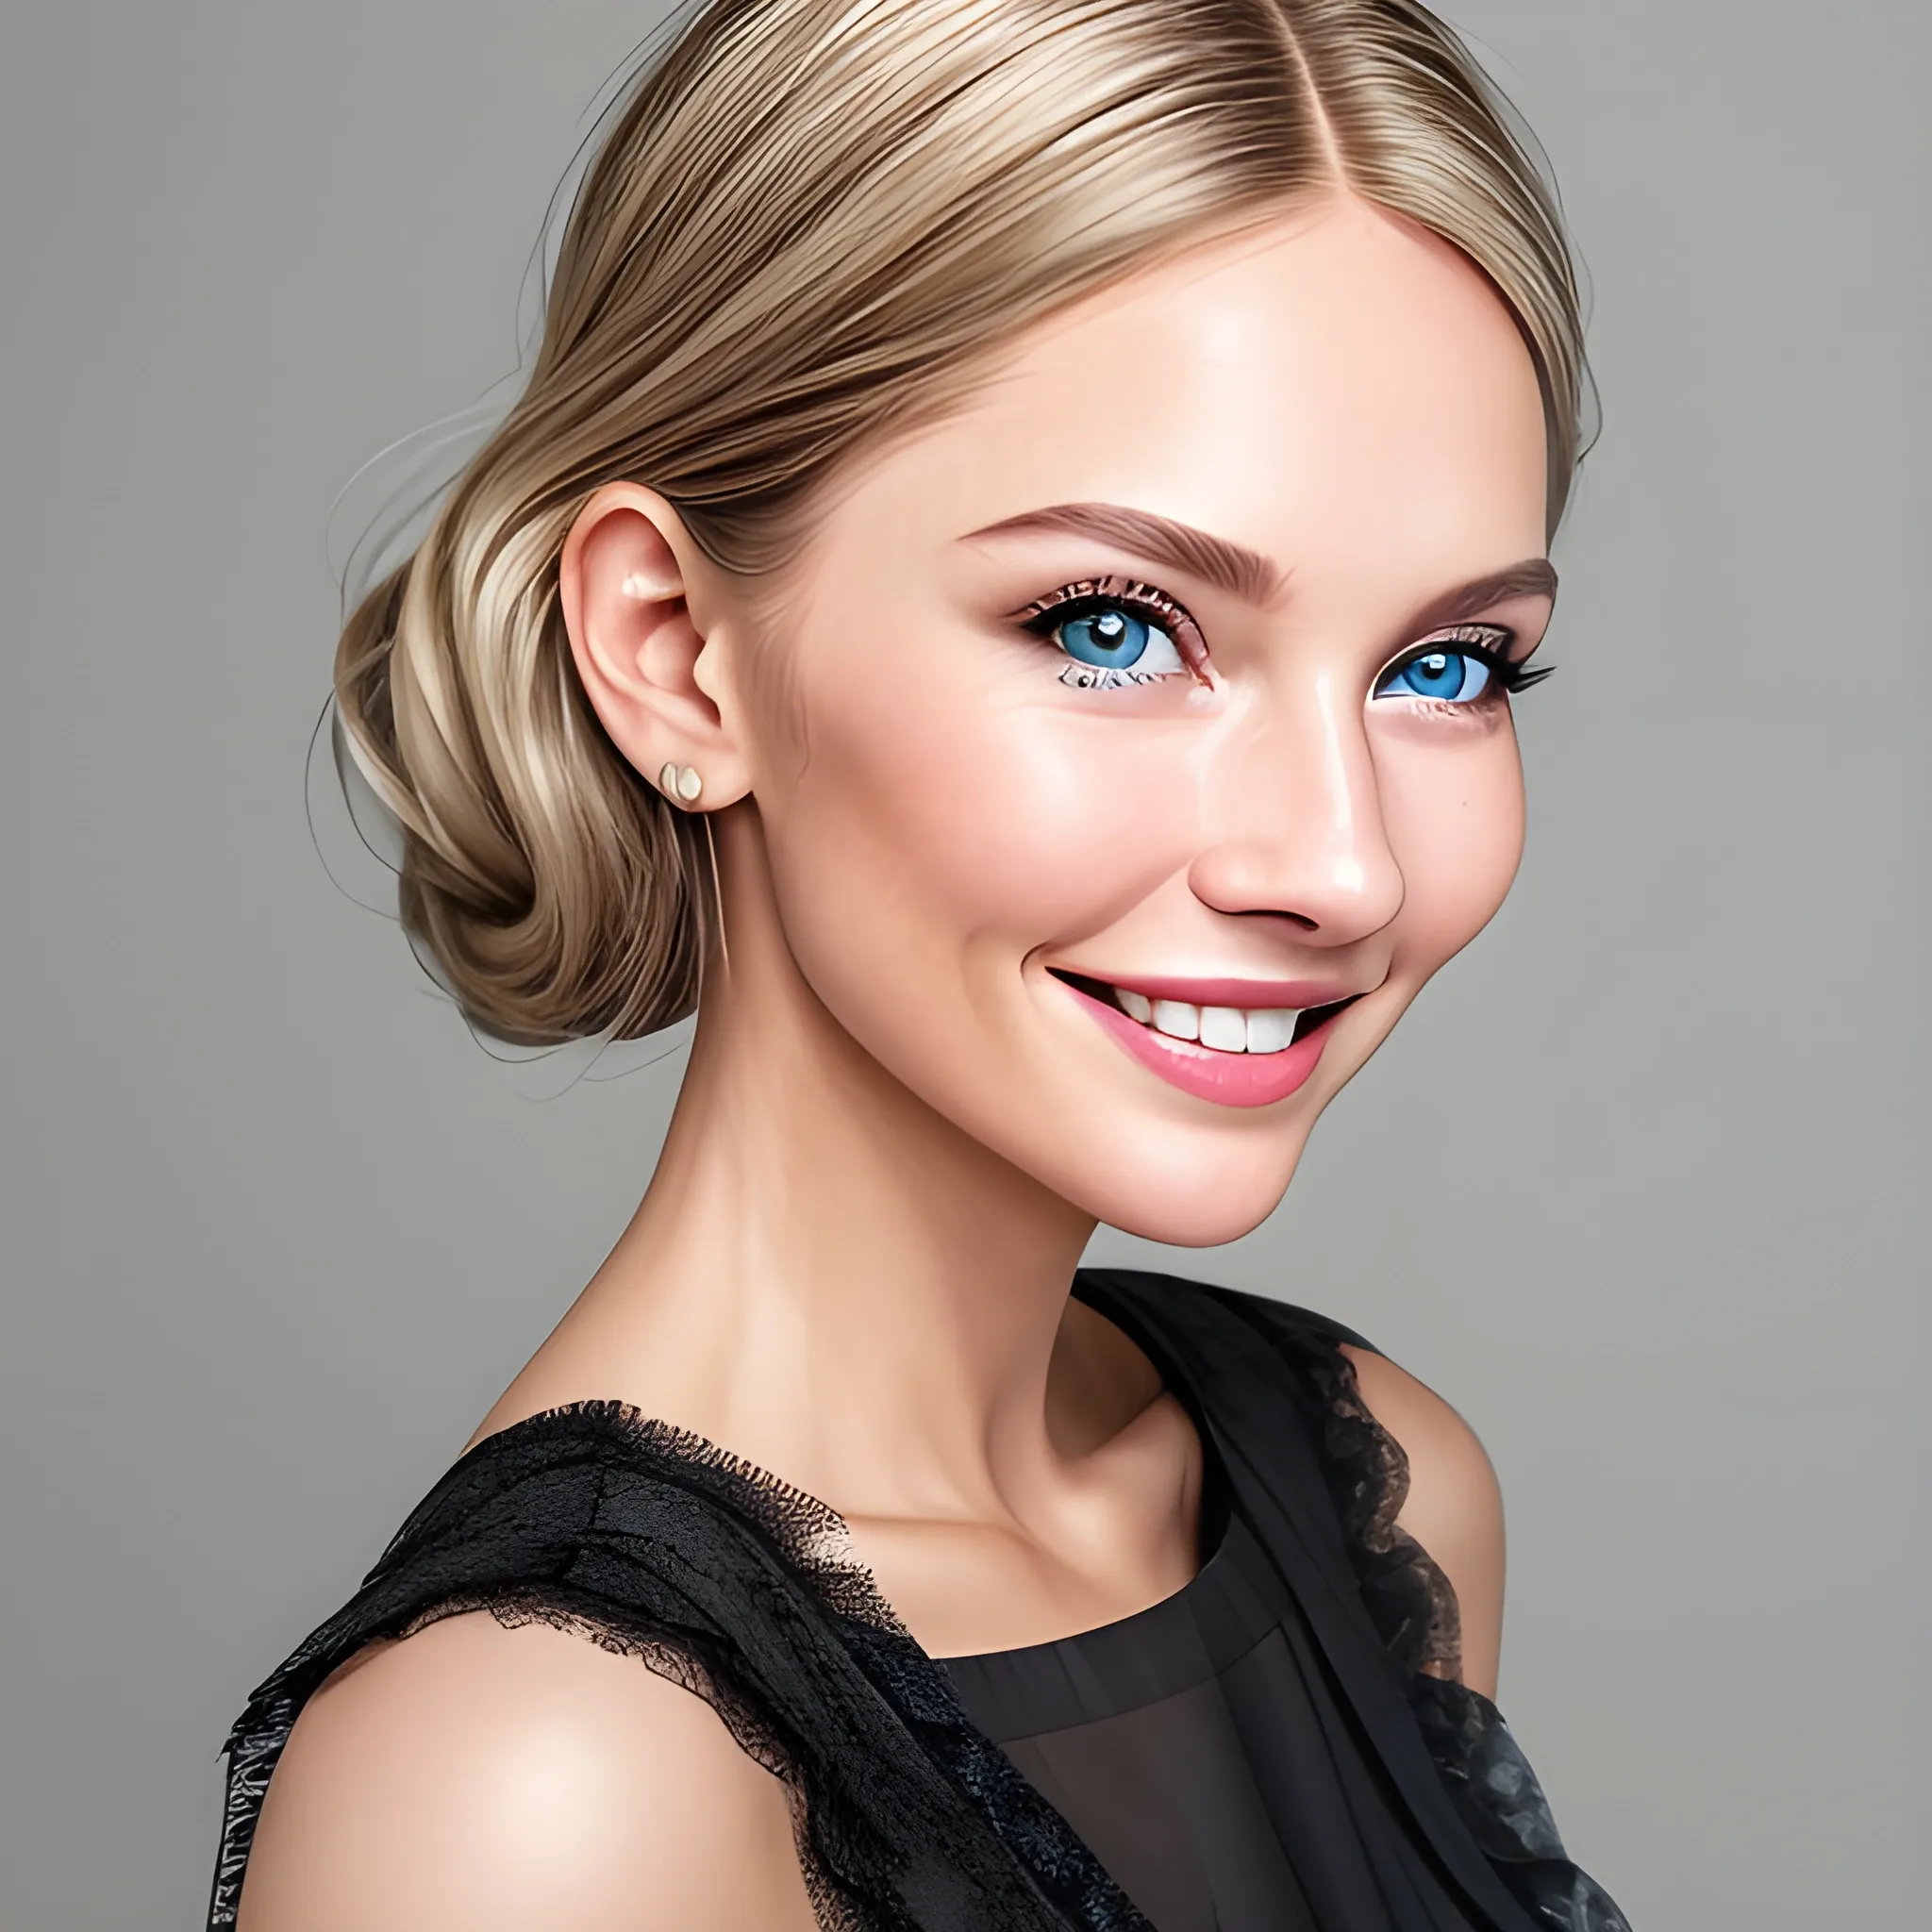 The image is a close-up portrait of a woman with striking features. She has fair skin, high cheekbones, and a warm, inviting smile that reveals pearly white teeth. Her bright blue eyes are the centerpiece of the image, giving a sense of depth and vitality. Her  hair is styled in a casual manner with some strands elegantly framing her face. She wears a black top with a hint of lace detail, suggesting a blend of comfort and sophistication. The lighting in the photo highlights her facial features and complements her complexion, adding to the overall allure and friendly aura of the image.